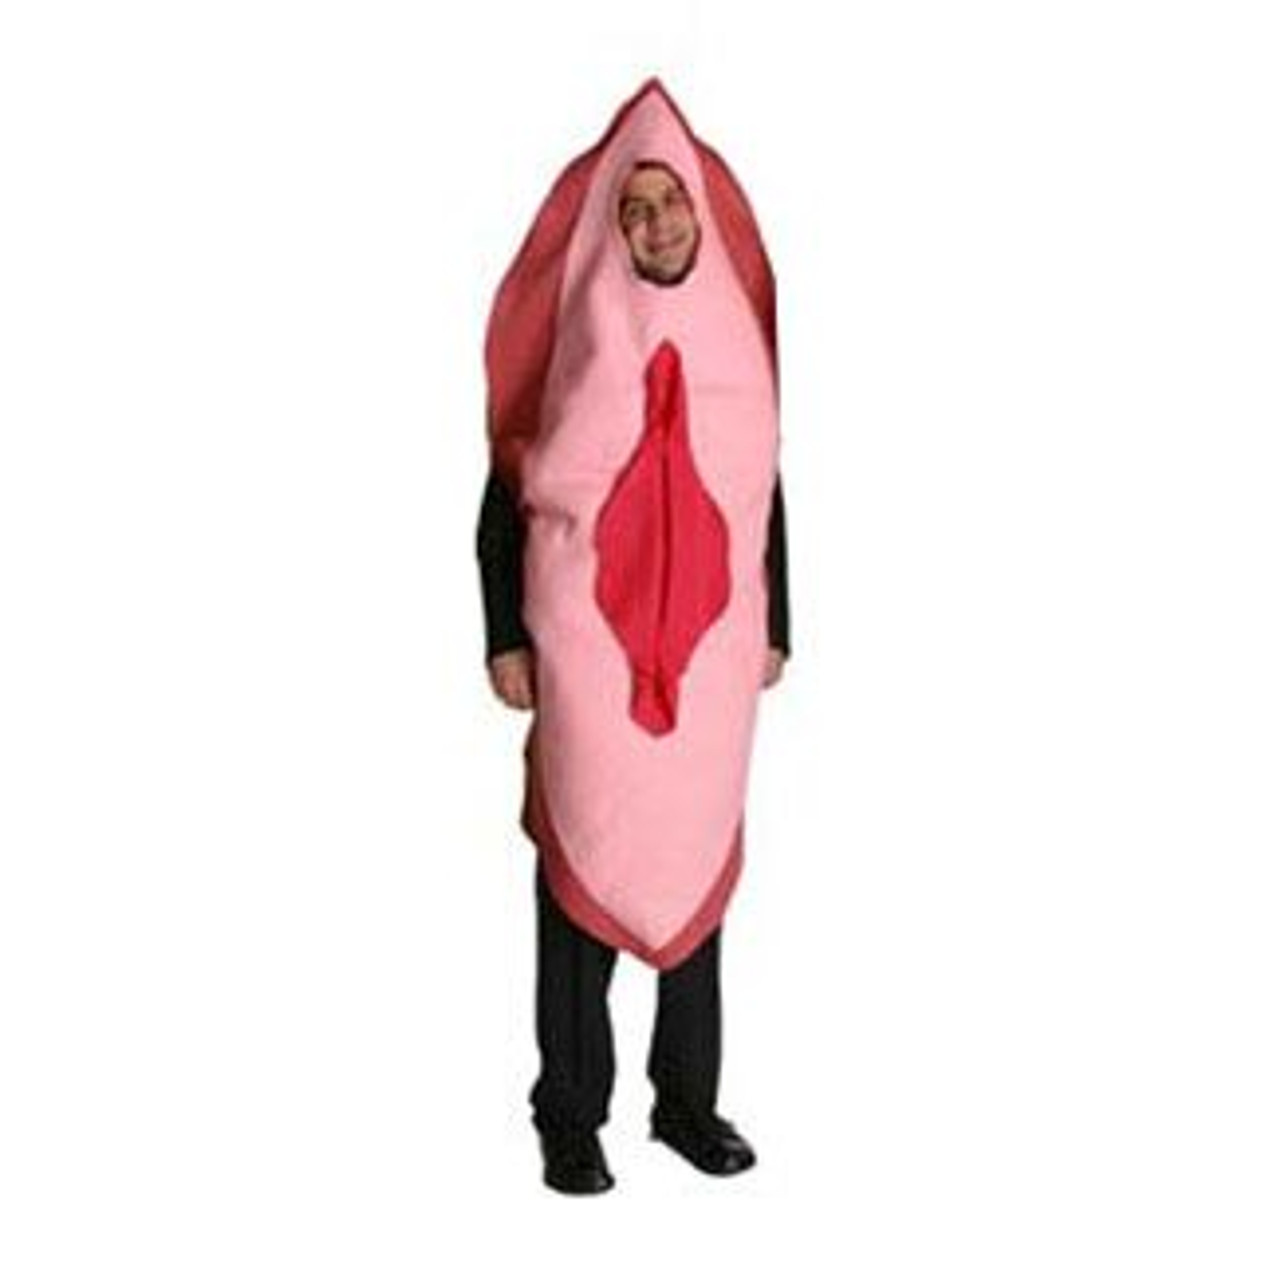 craig laney recommends penis and vagina halloween costume pic